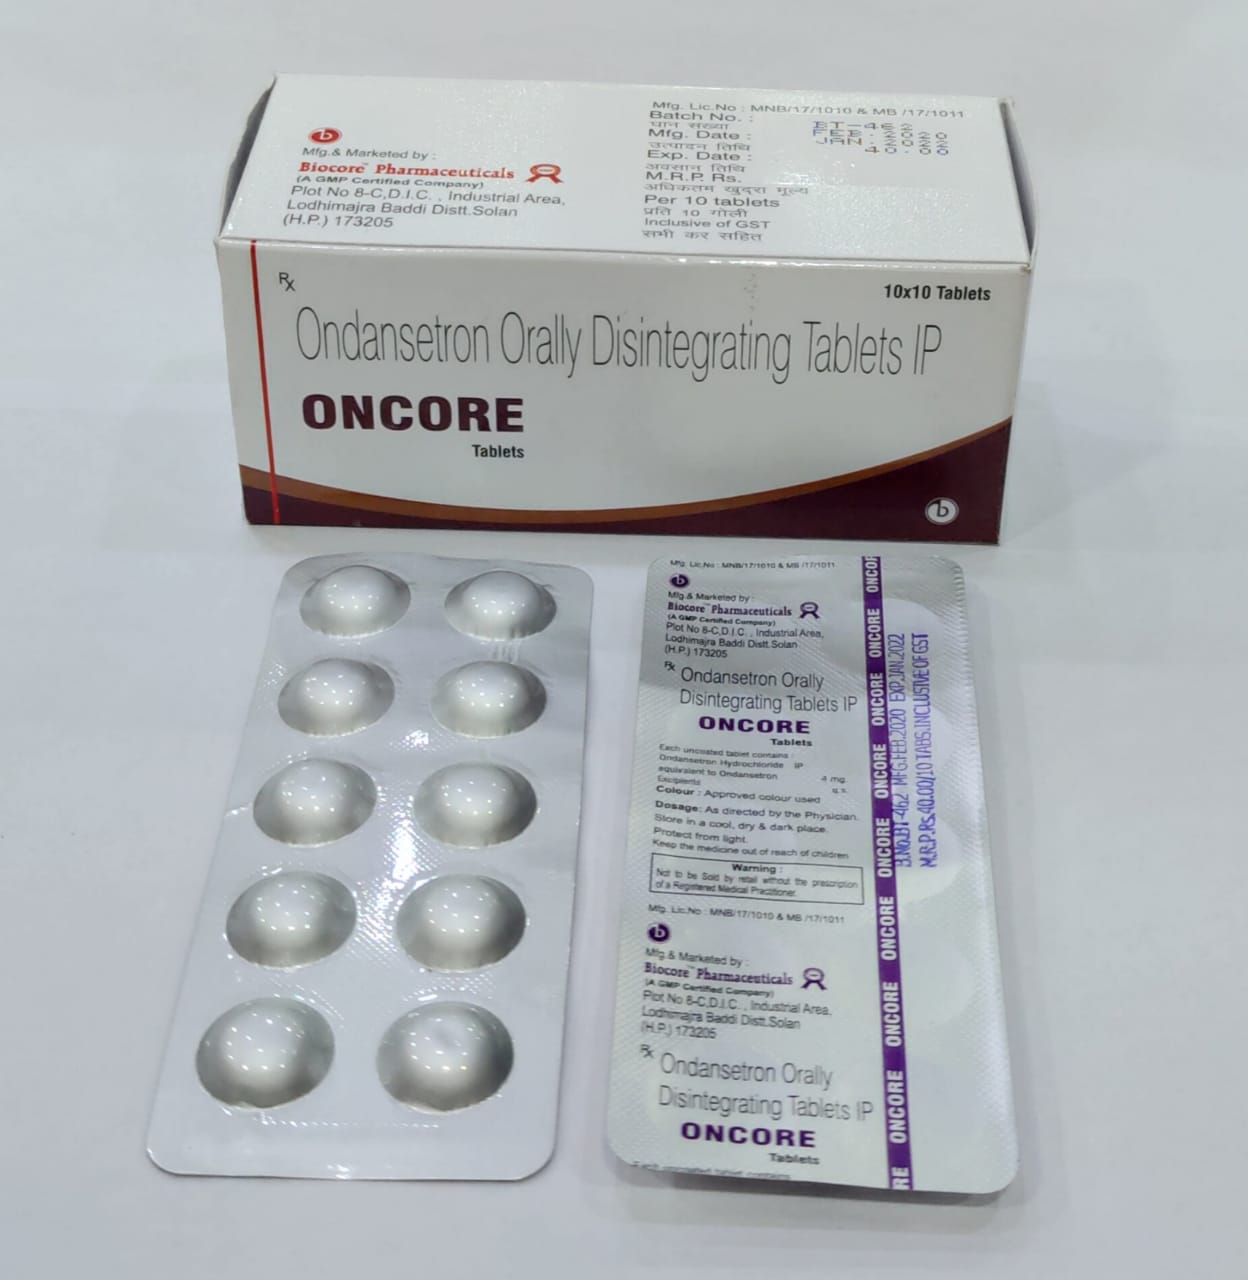 ONCORE Tablets